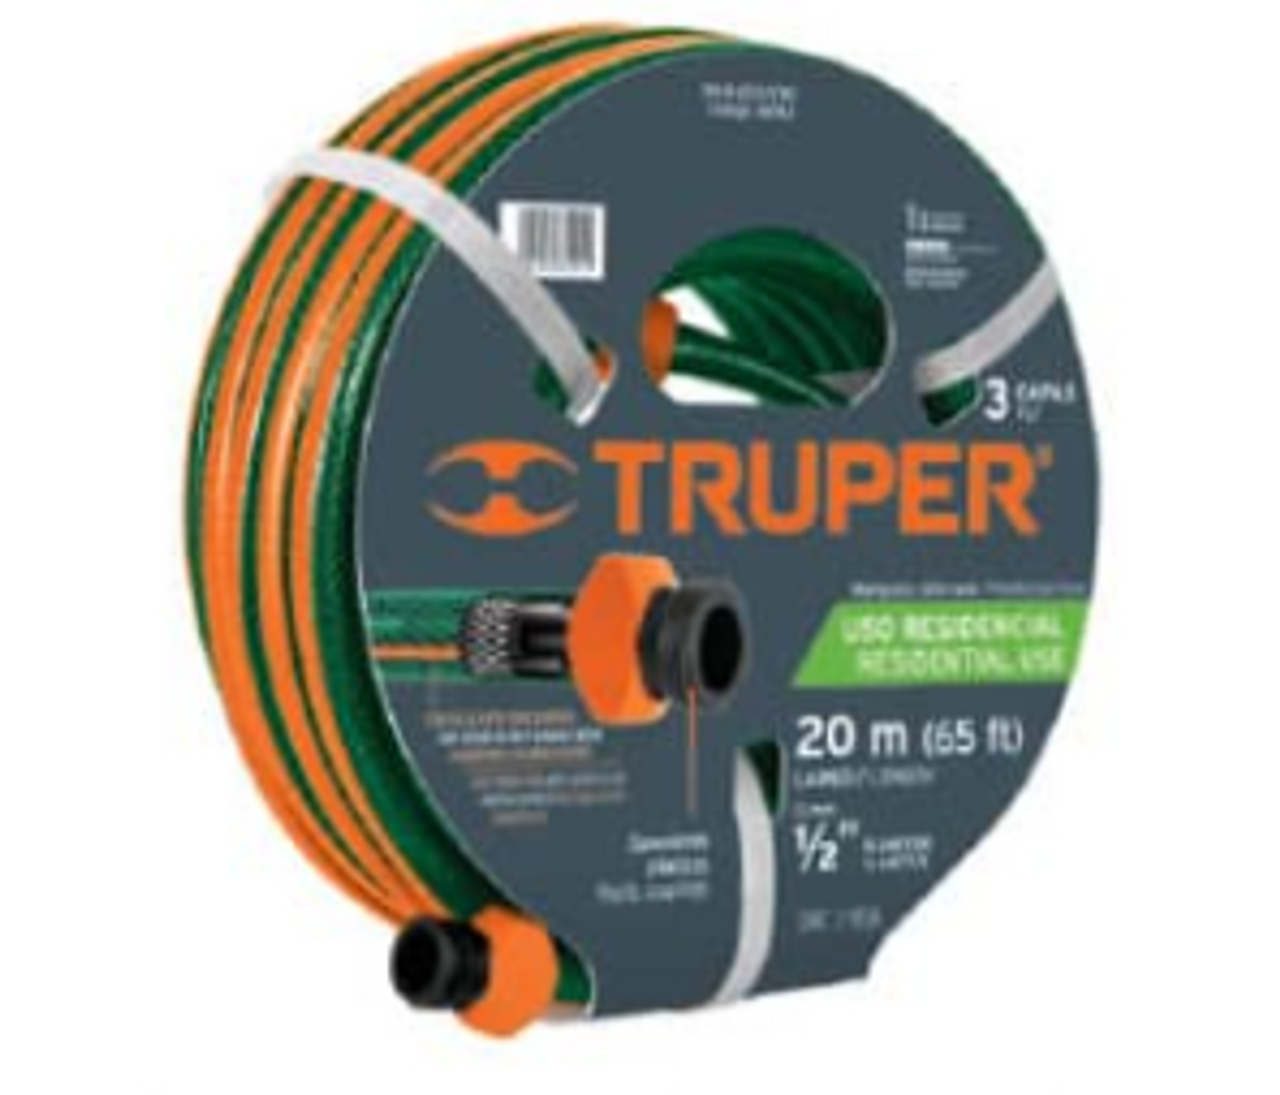 Truper 3-Ply Reinforced Hoses w/ Plastic Couplings, 32.8 Ft 1/2" 3 Ply Water Hose #16050